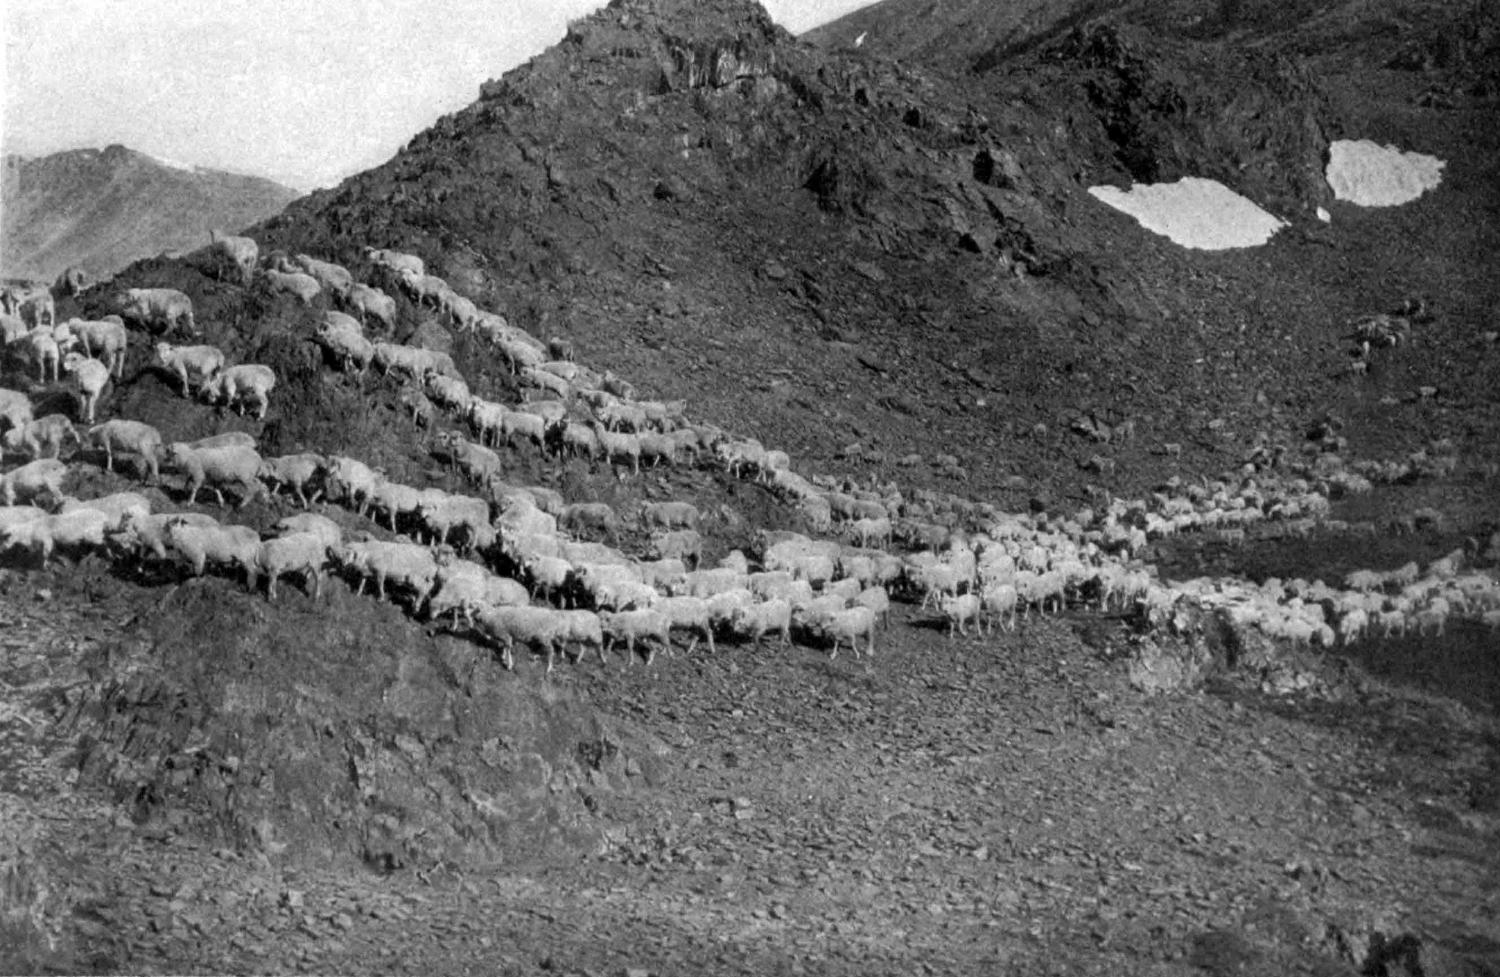 A historical photograph that shows a large flock of sheep traversing a rocky mountain slope. The terrain is covered with scree, talus, and patches of snow and there is no vegetation.